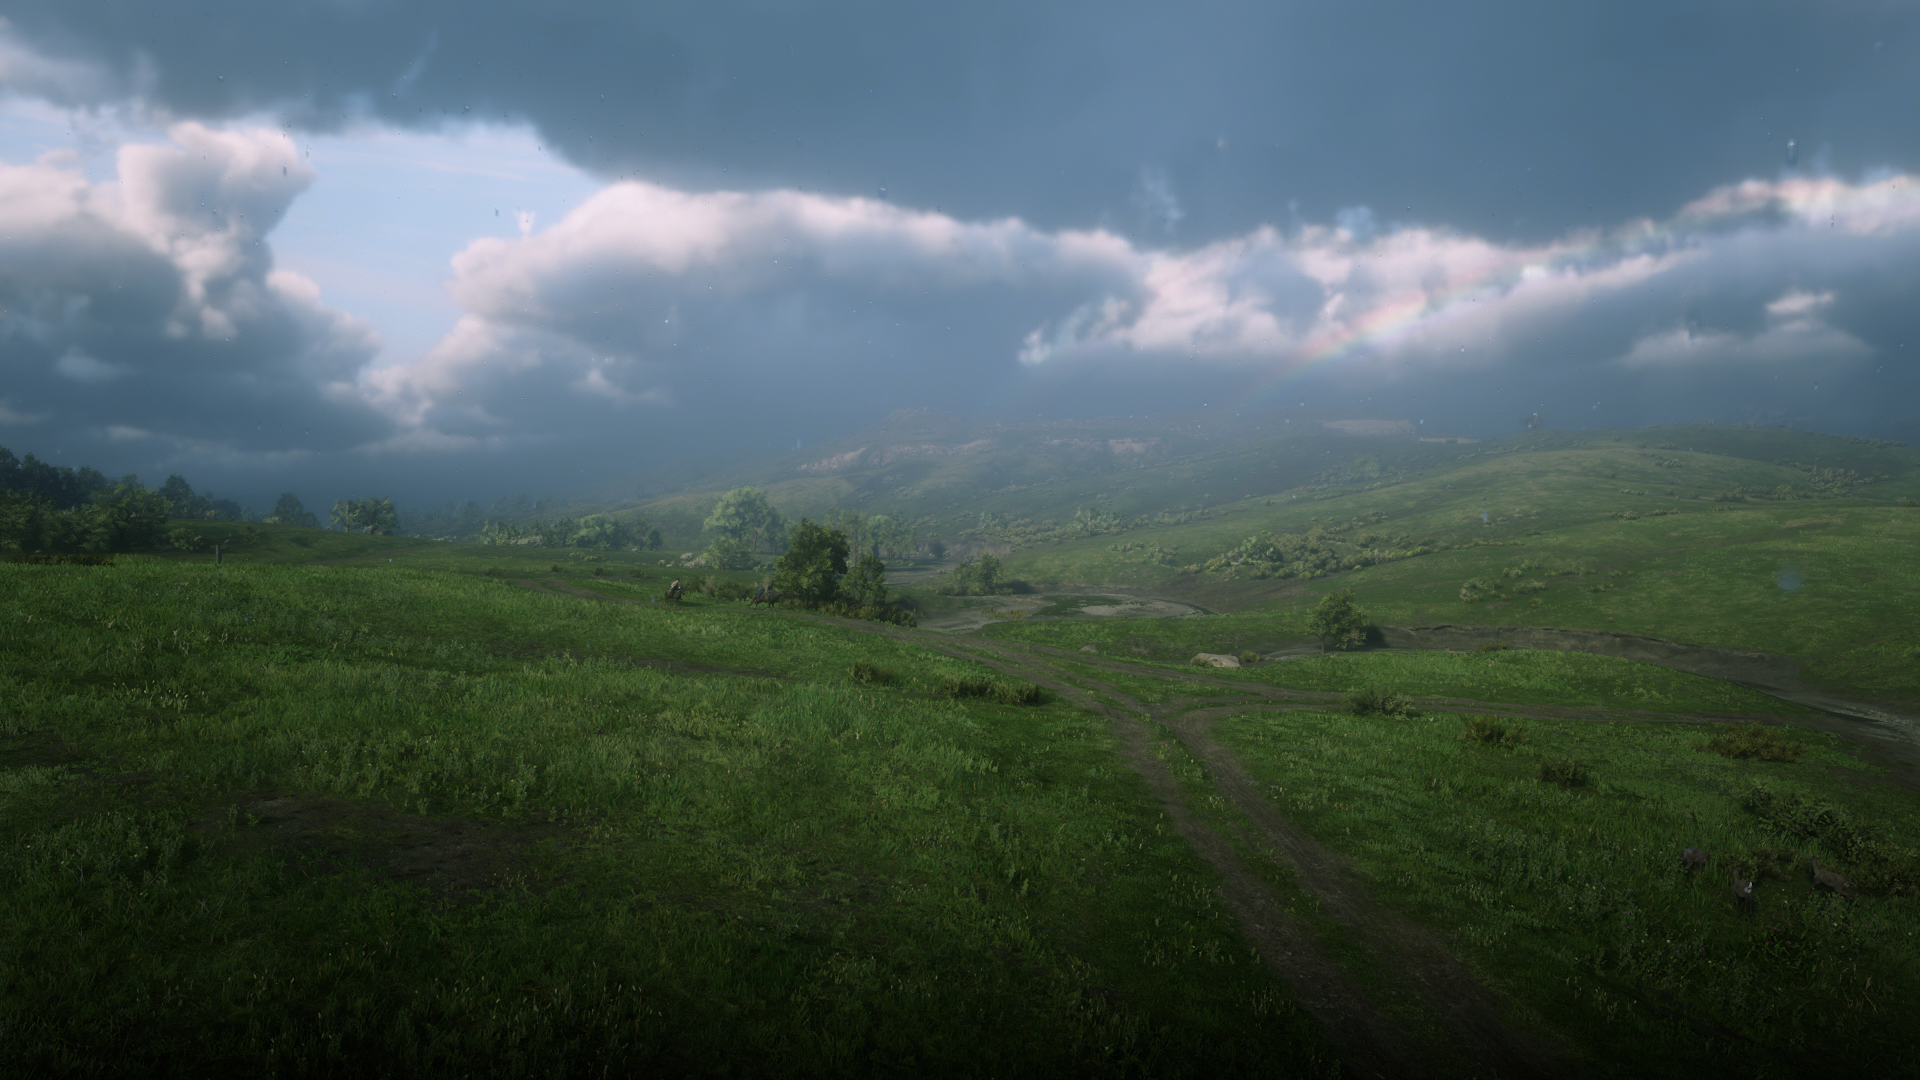 General 1920x1080 Red Dead Redemption 2 screen shot video games